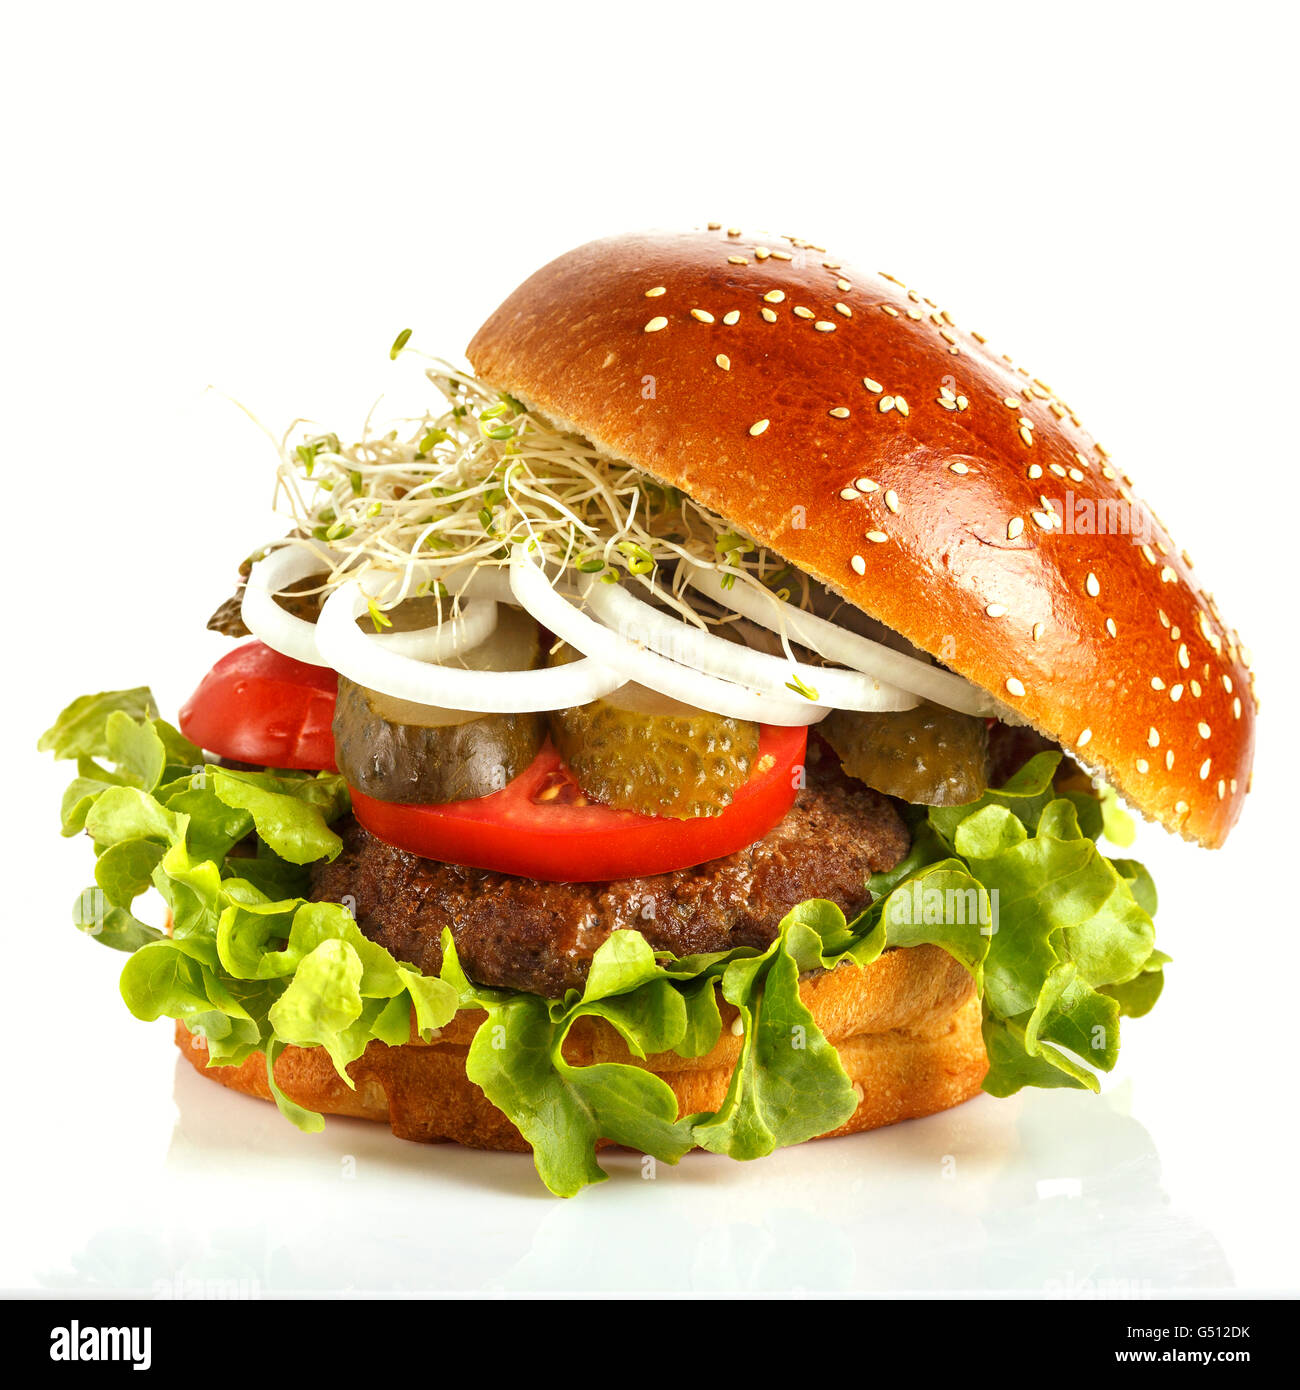 Juicy, tasty burger with pickles, tomatoes, onions and flax sprouts Stock Photo